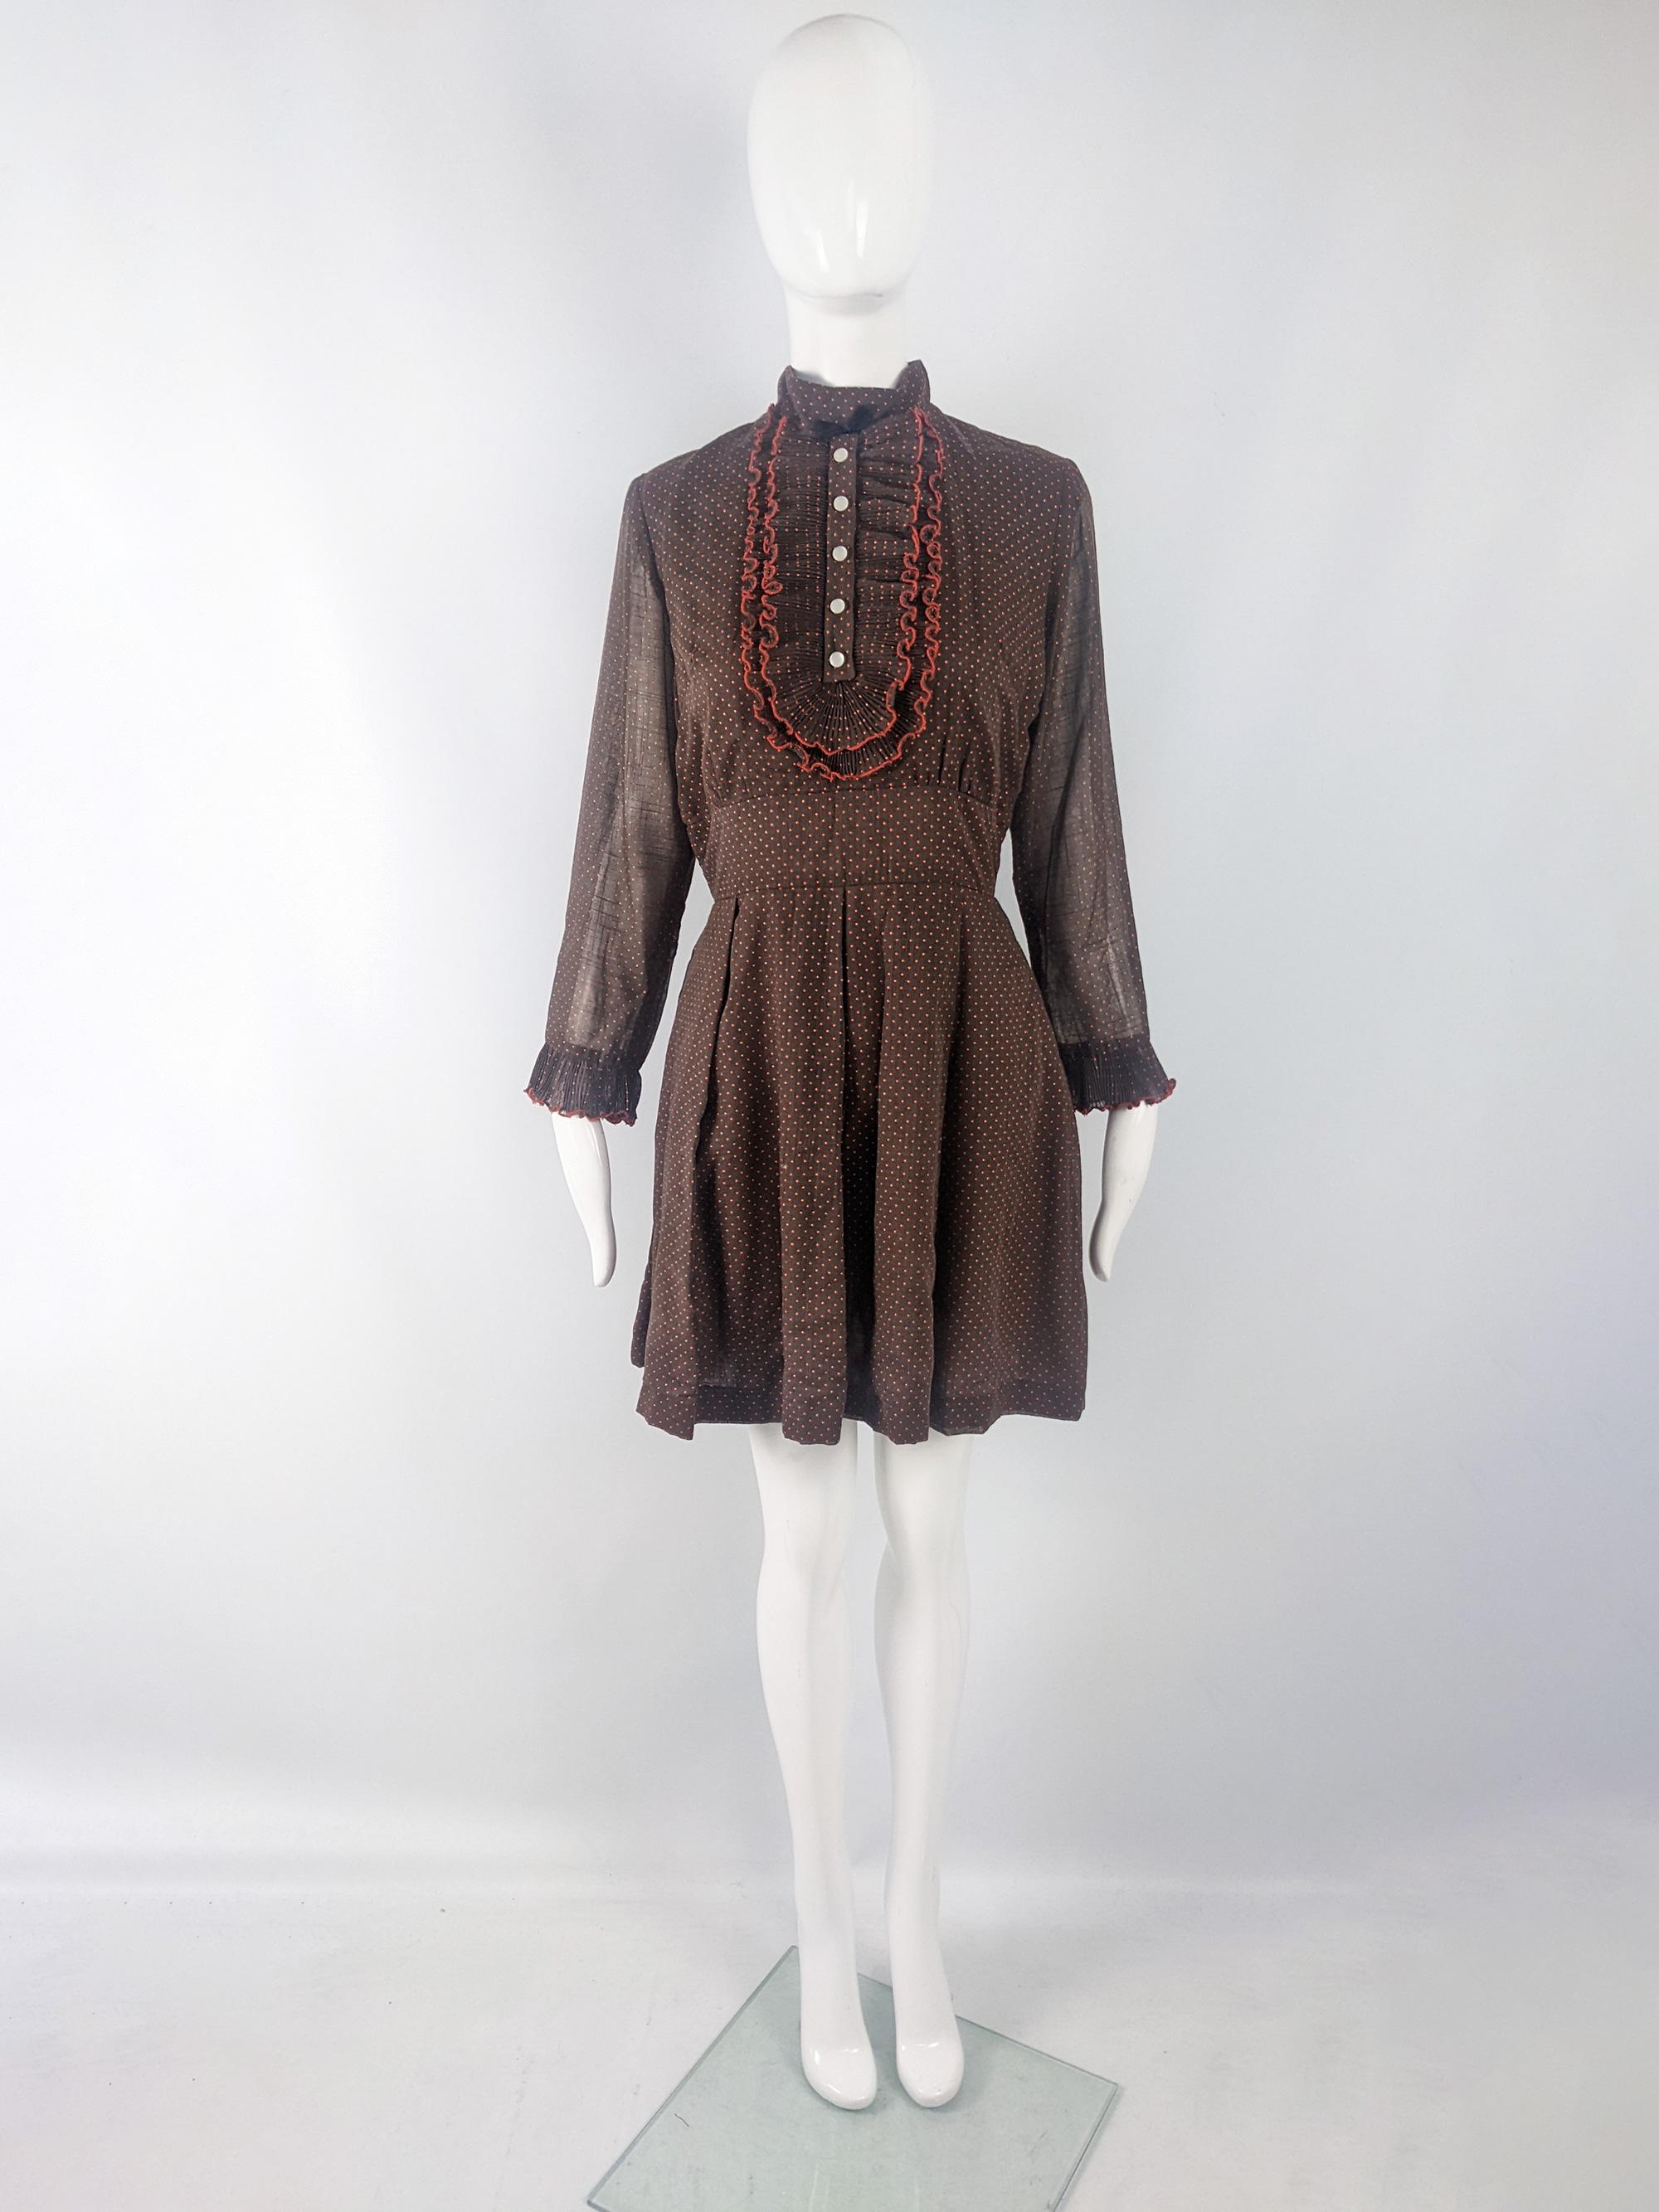 An amazing vintage womens mini dress from the late 60s / early 70s by London Deb. In a brown cotton fabric with an orange polka dot pattern throughout. It has long, sheer sleeves with a frilled cuff, a high neck and a pleated double bib collar -